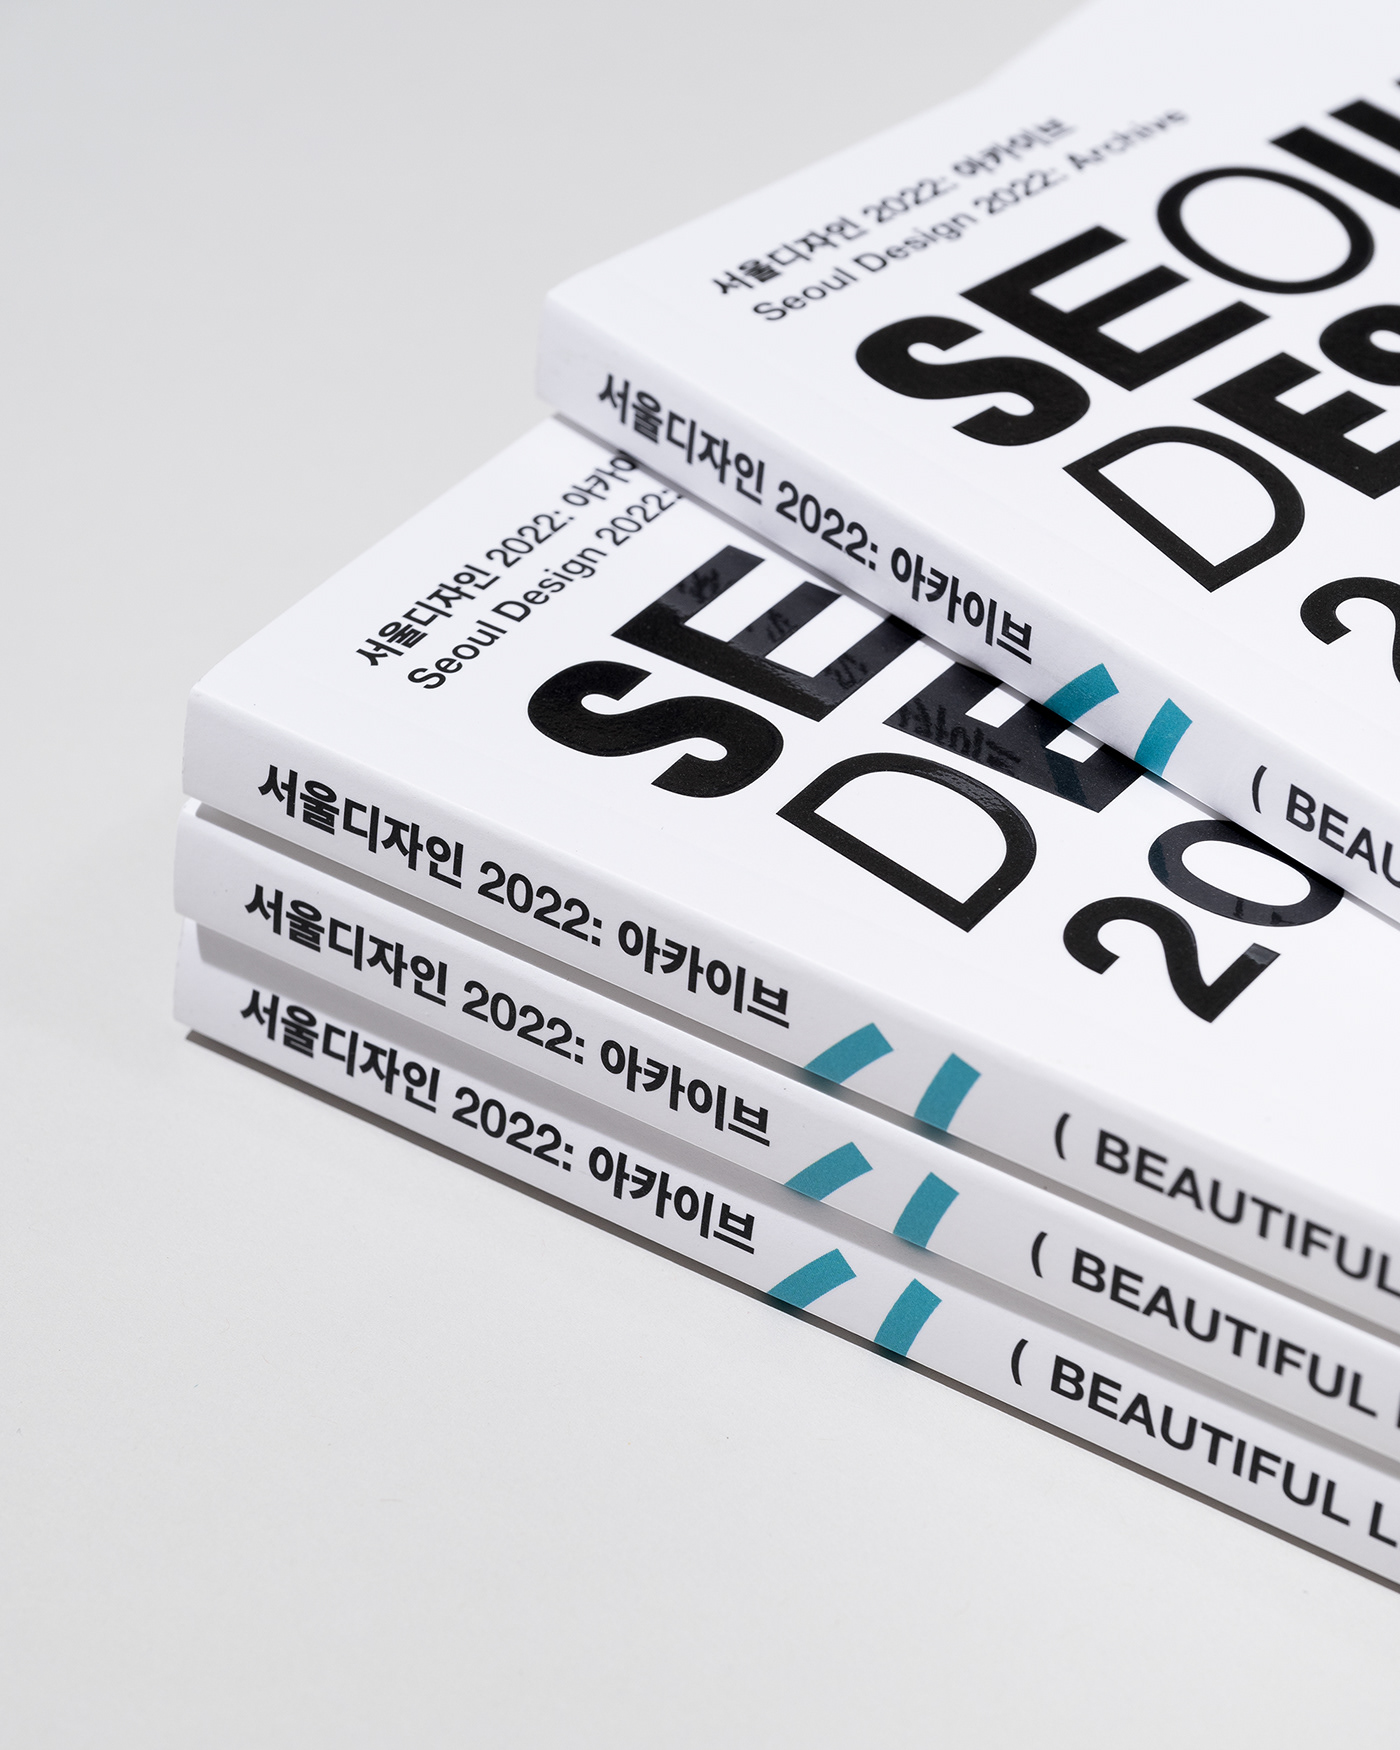 Archive book chuigraf DDP eco-friendly Exhibition  mice seoul Seoul design 2022 typography  